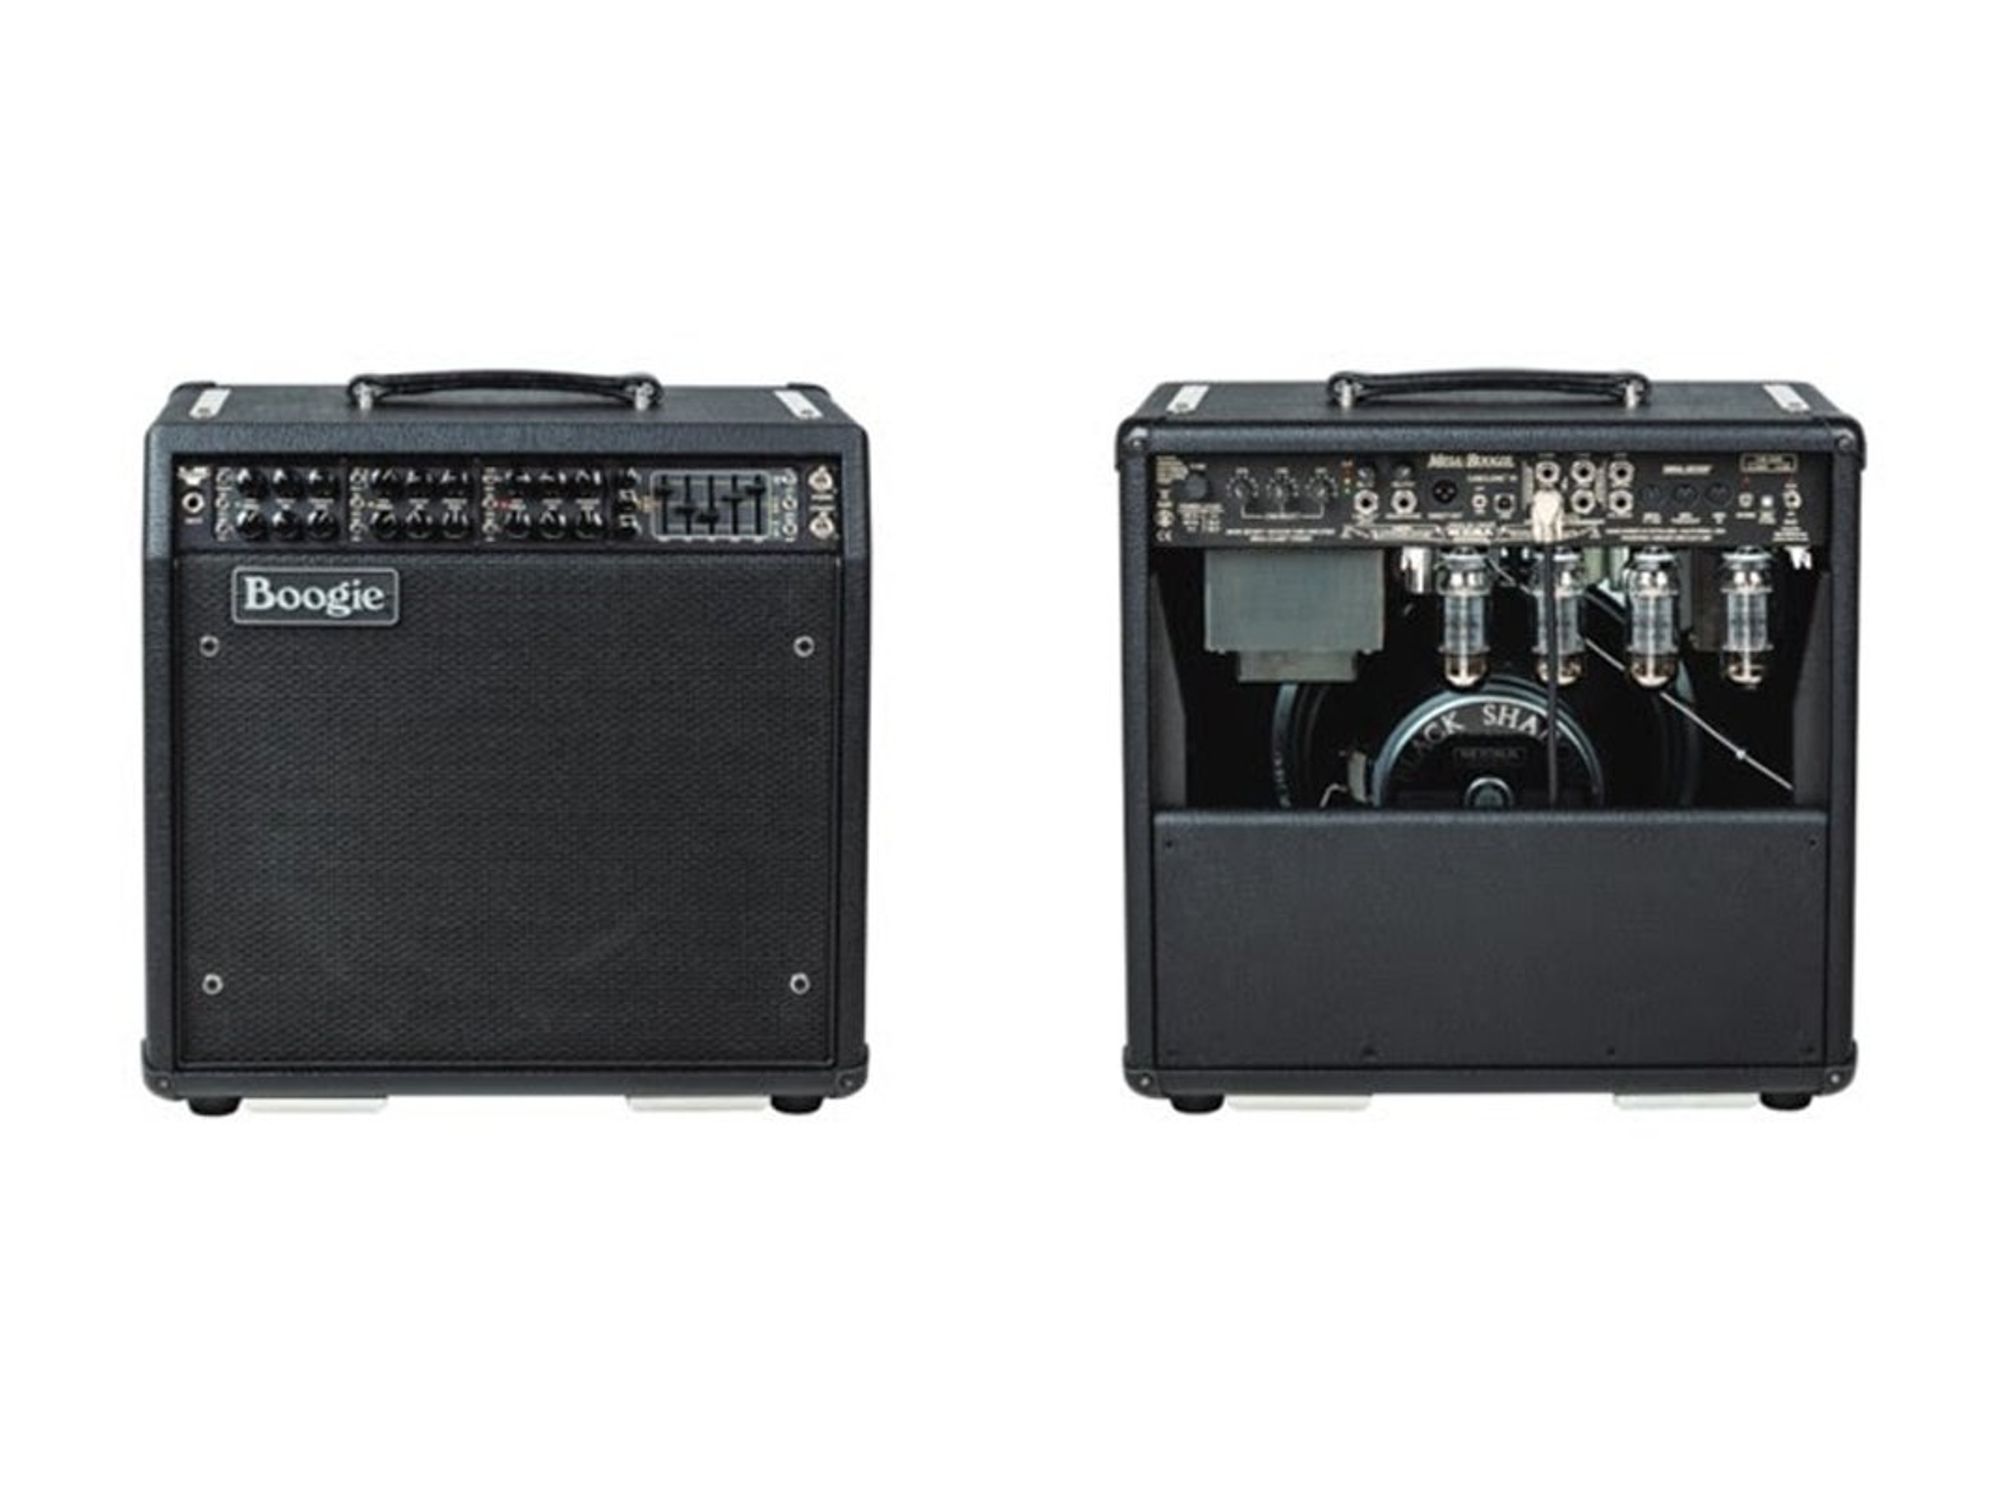 Introducing the Mesa/Boogie Mark VII